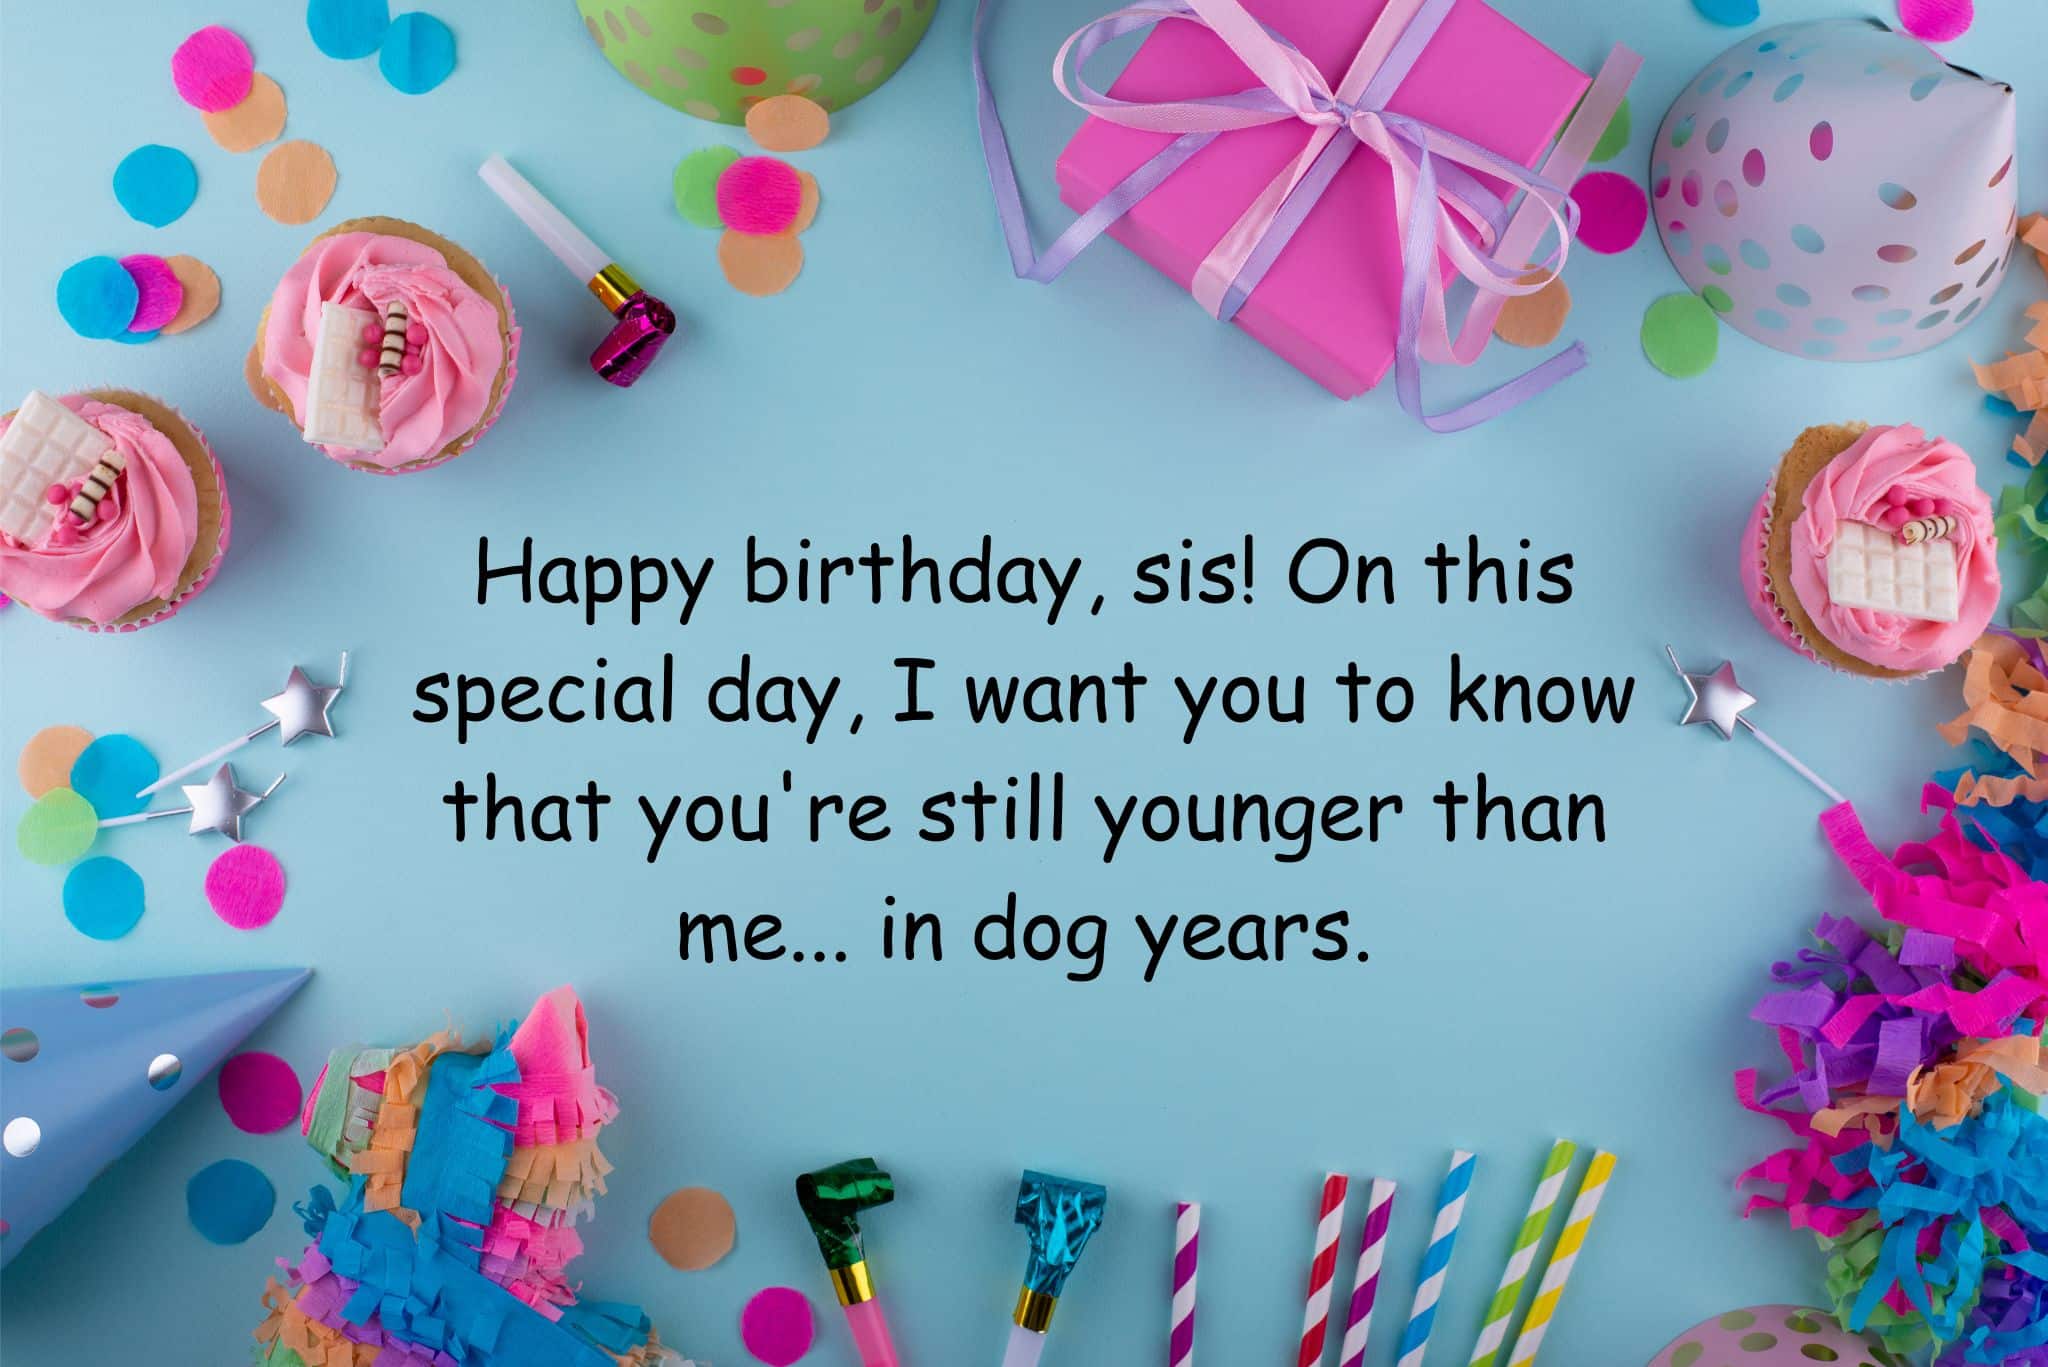 happy birthday, sis! on this special day, i want you to know that you're still younger than me... in dog years.